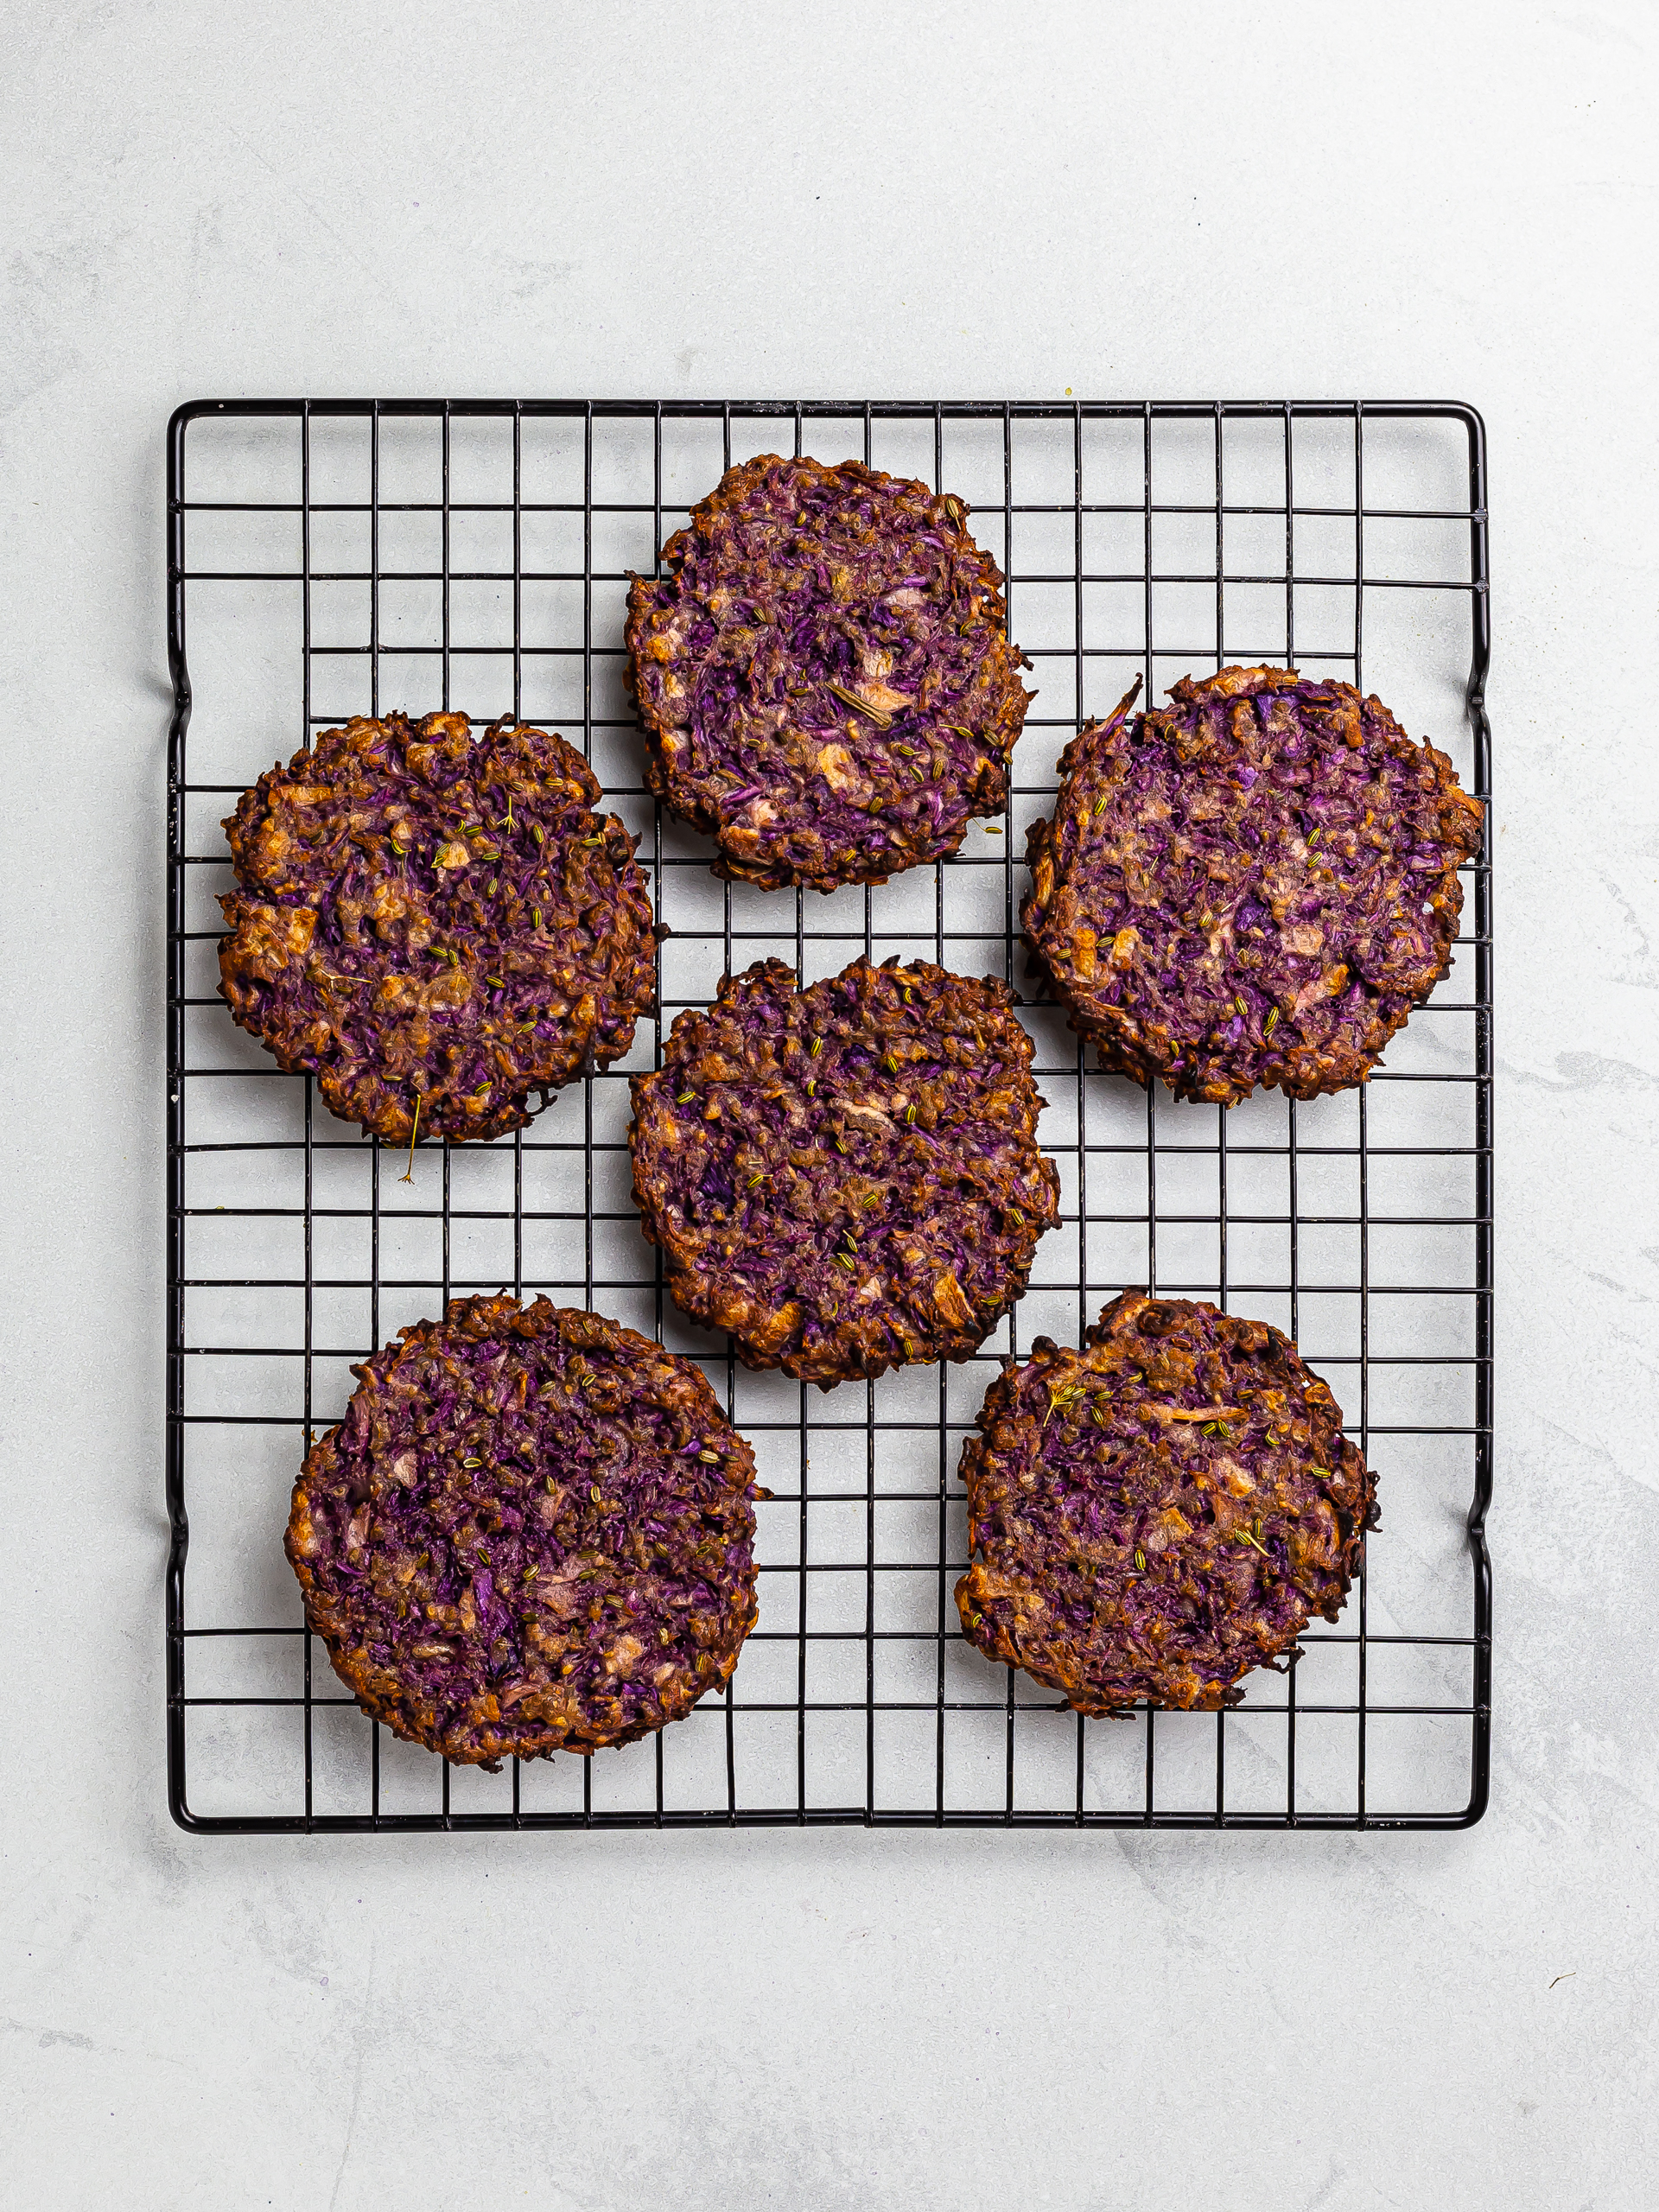 oven-baked red cabbage fritters on a rack